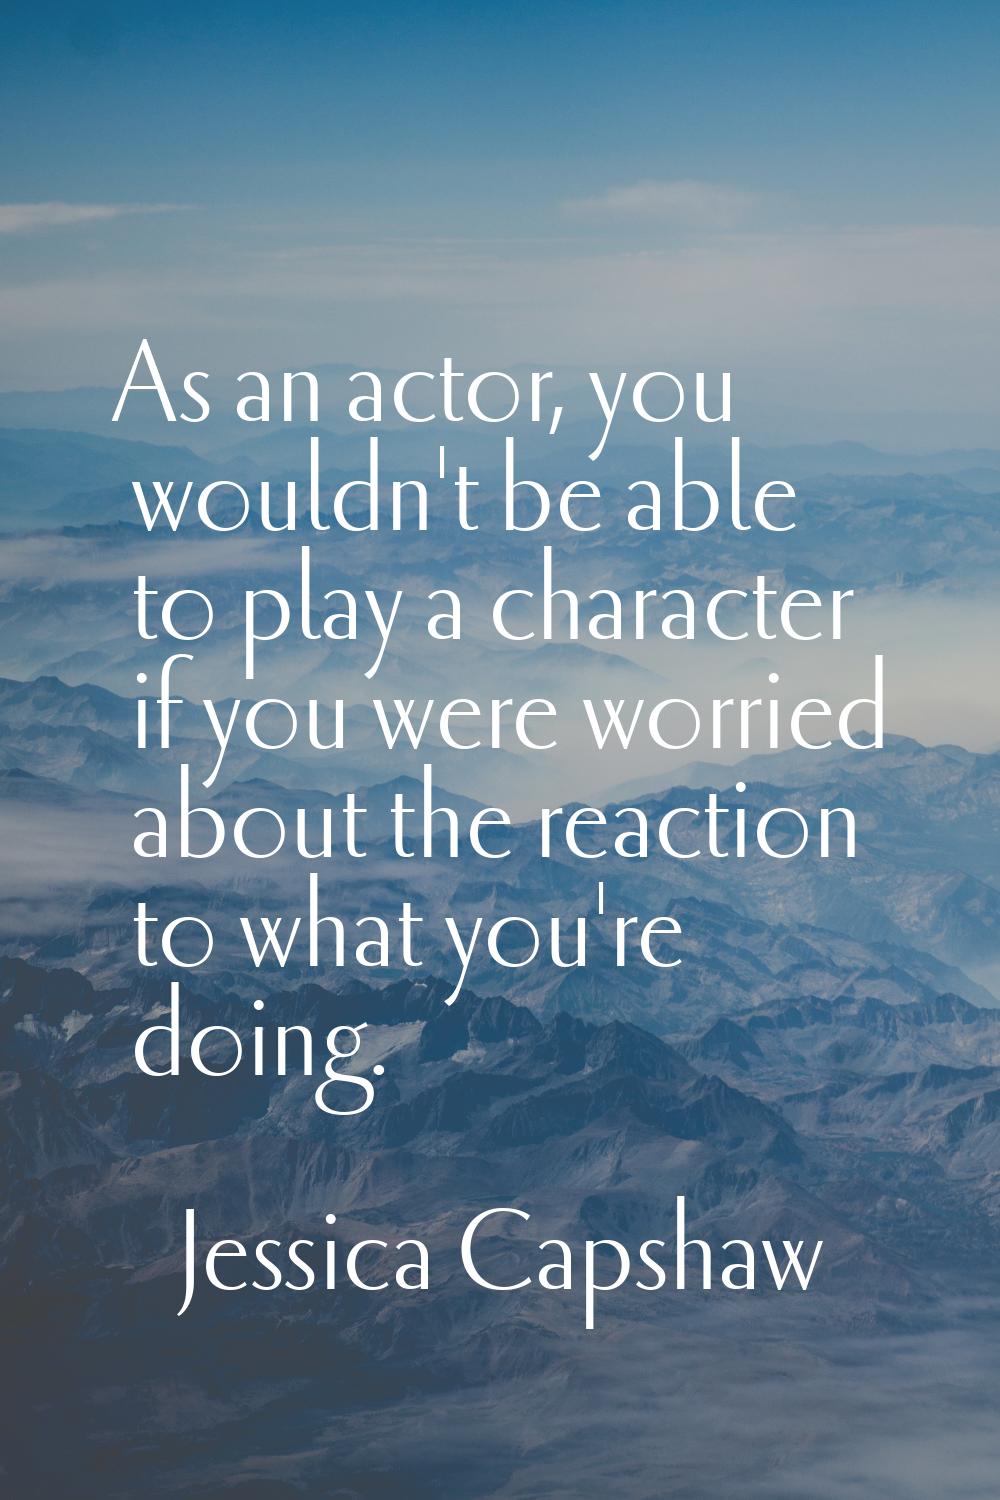 As an actor, you wouldn't be able to play a character if you were worried about the reaction to wha